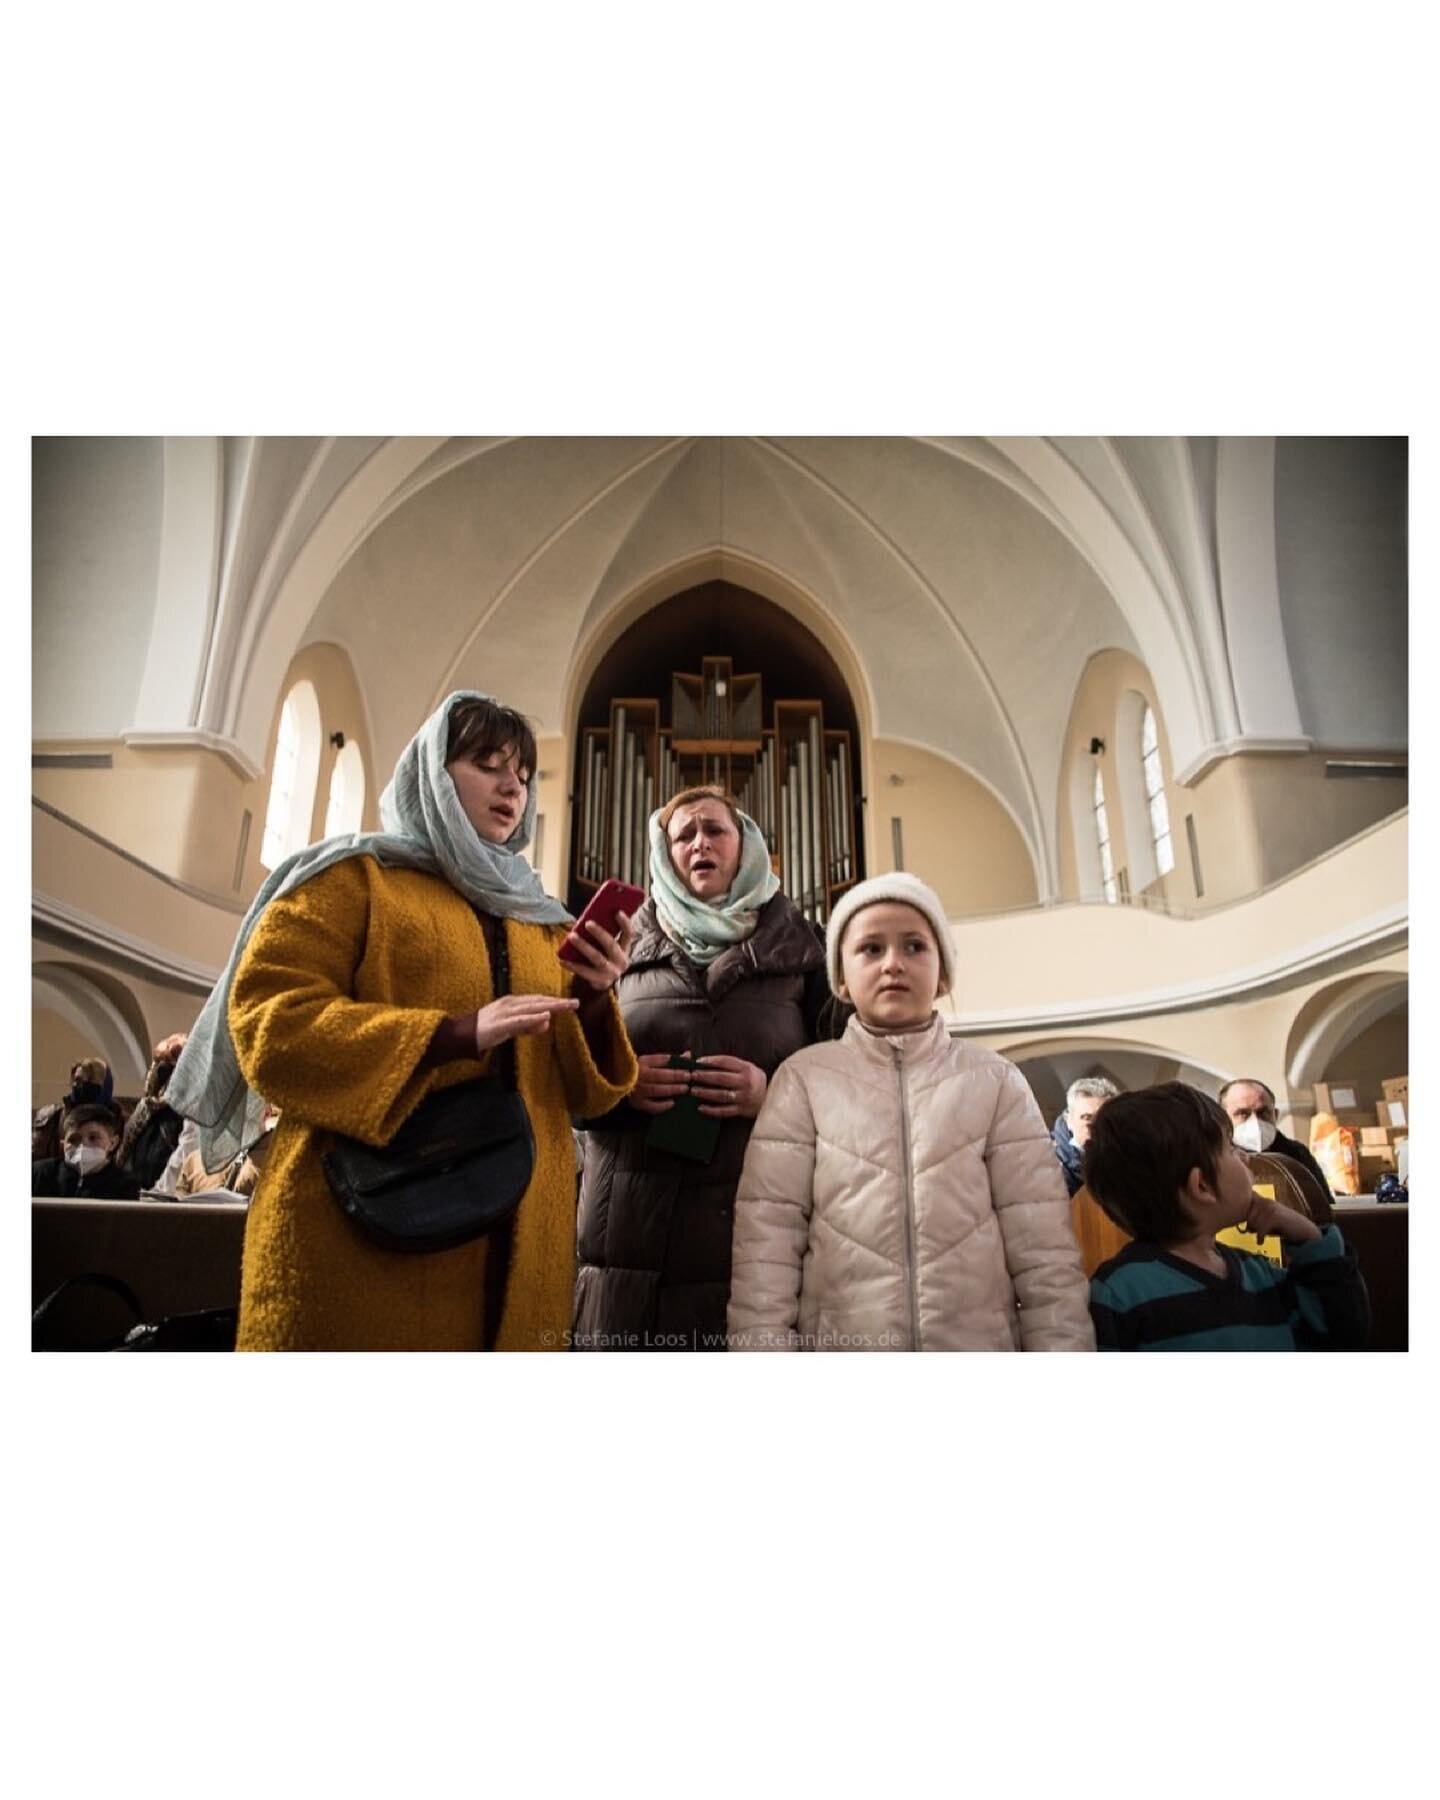 Praying for Peace
Members of the Ukrainian Orthodox community, who have found shelter for their church service in an evangelical church, and refugees from Ukraine celebrate a church service in Berlin
.
for @apnews
.
Story by Kirsten Grieshaber

https